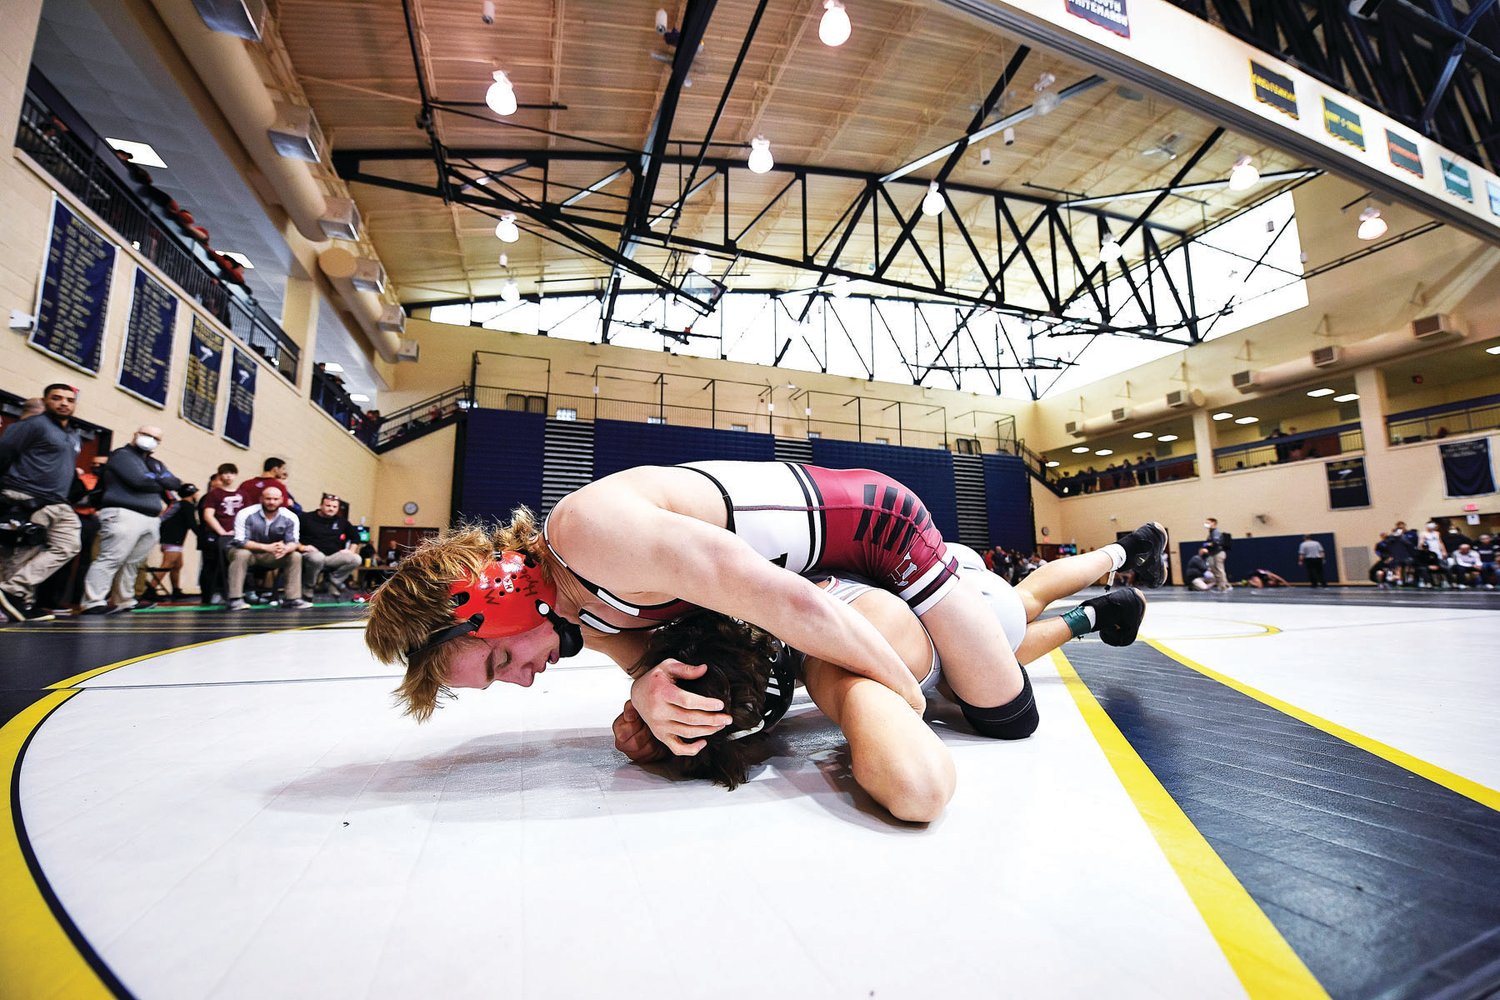 Eric Alderfer of Faith Christian Academy during his third period fall victory over Sam Gautreau of Owen J. Roberts in the 145-pound weight class.